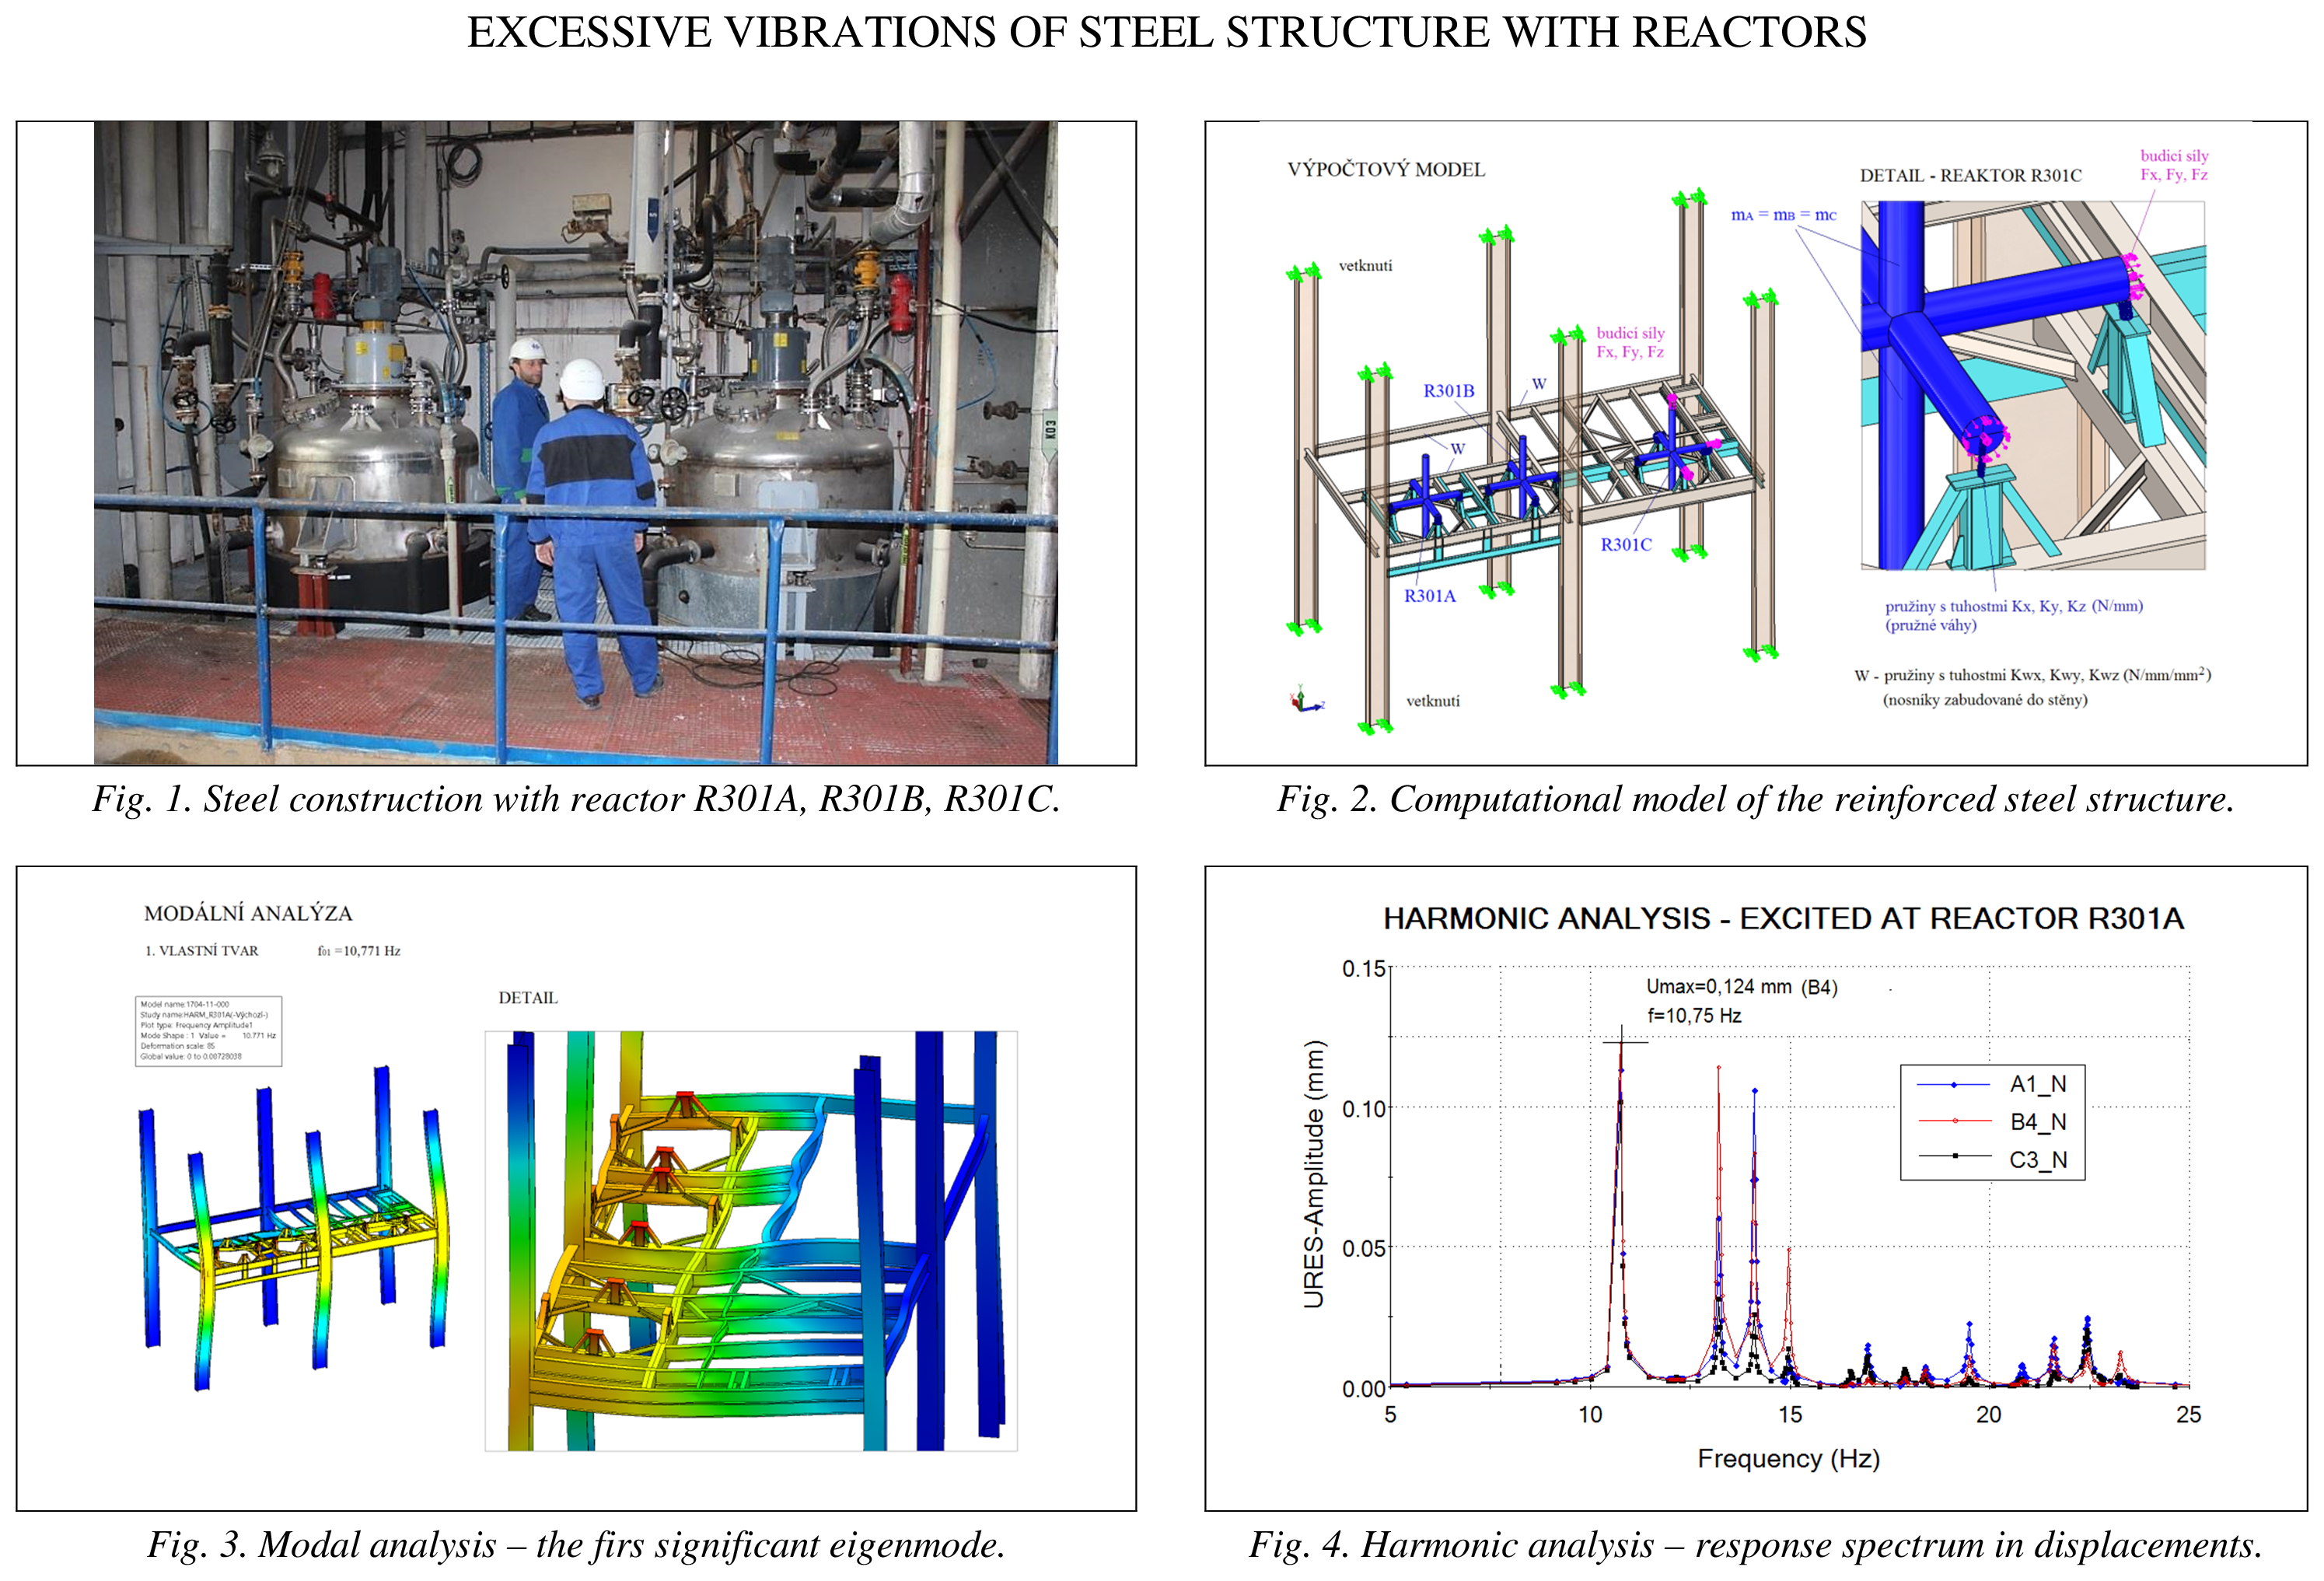 Excessive vibrations of steel structure with reactors